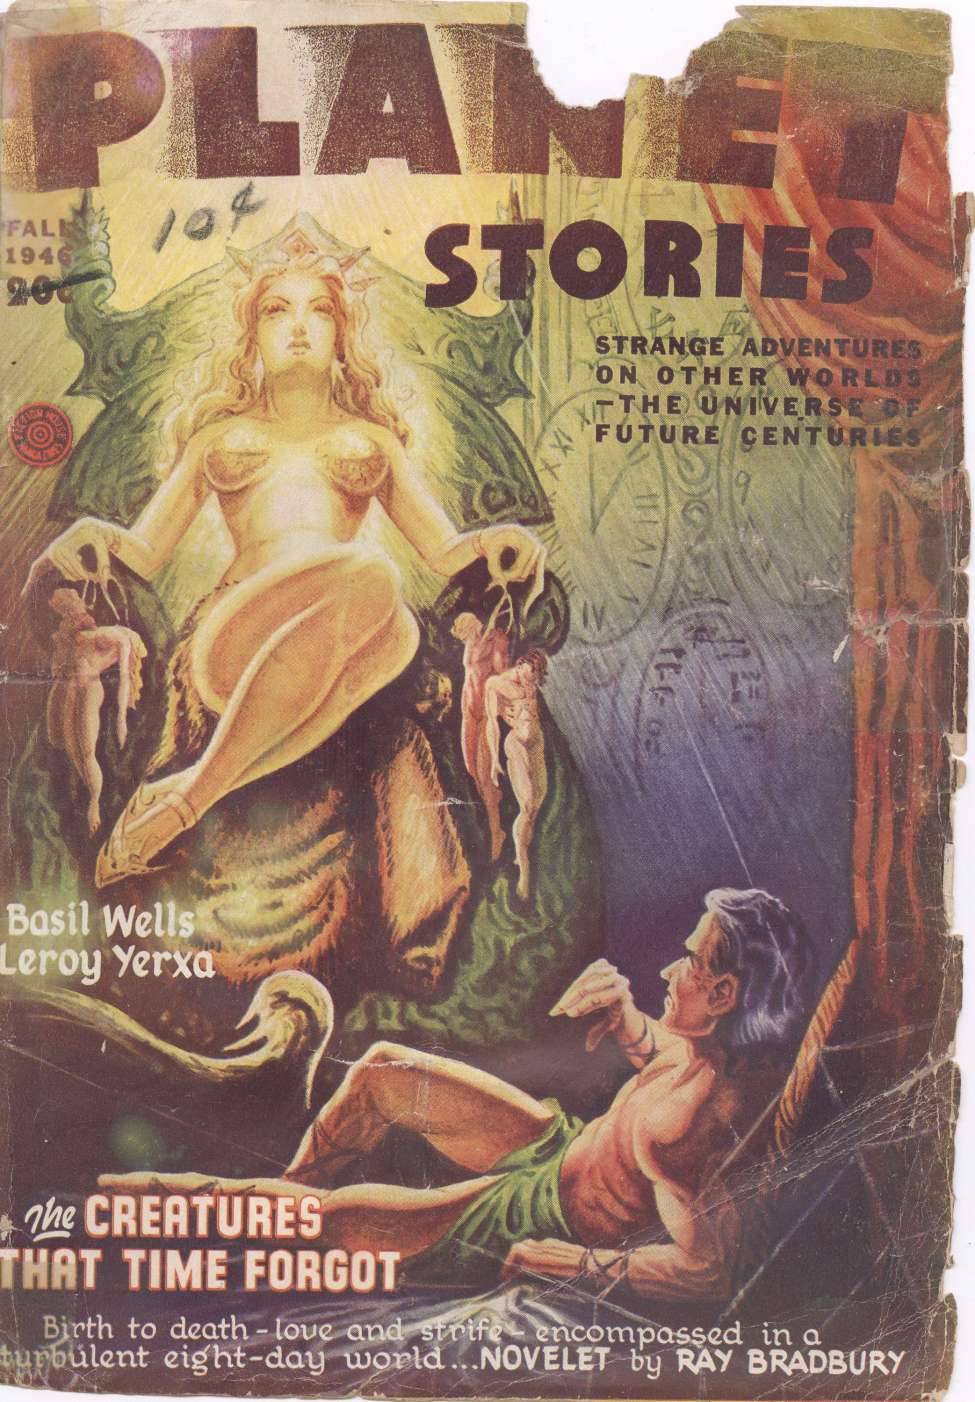 Comic Book Cover For Planet Stories v3 4 - The Creatures That Time Forgot - Ray Bradbury